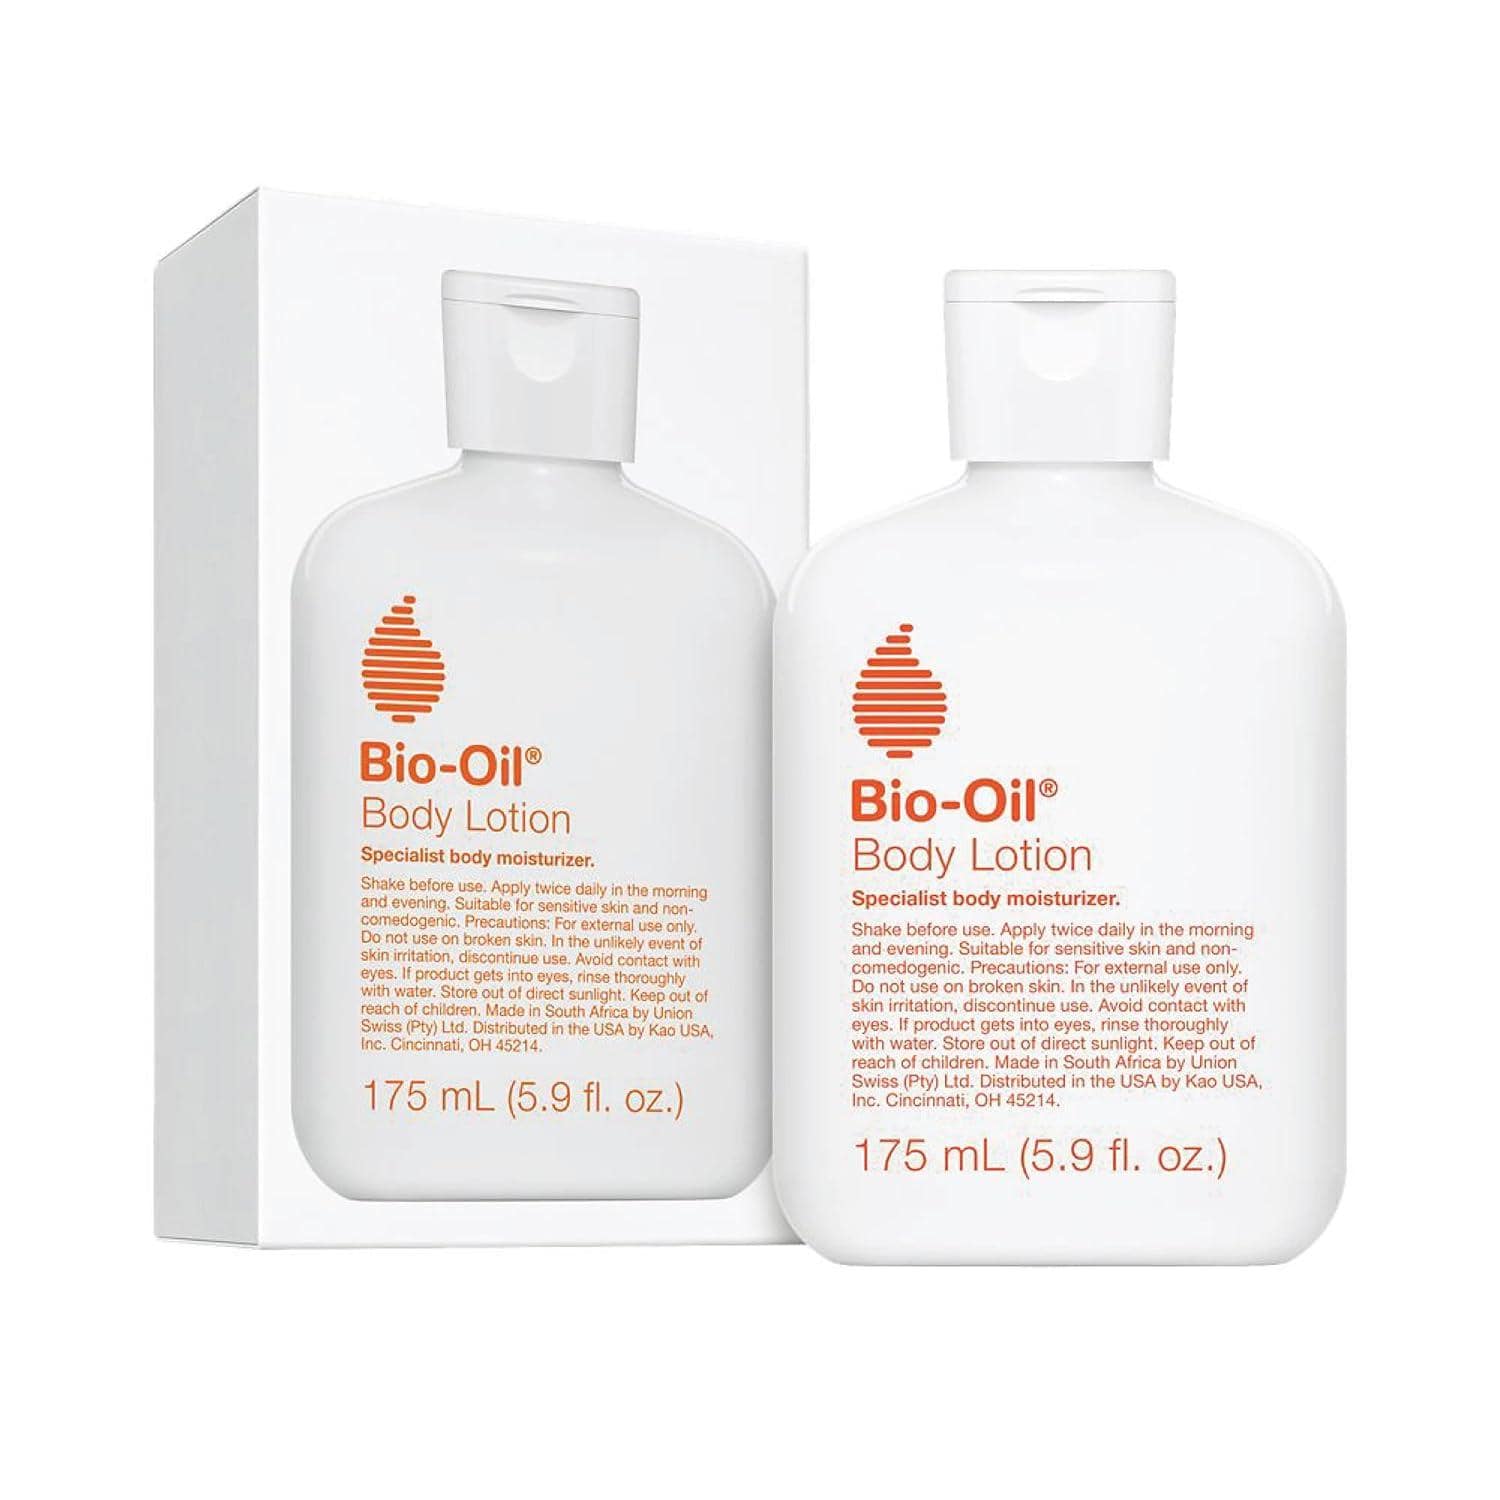 Bio-Oil's Body Lotion-Your Hydrating Miracle for Silky, Nongreasy Skin, Ideal for Dryness and Post-Swim Care.